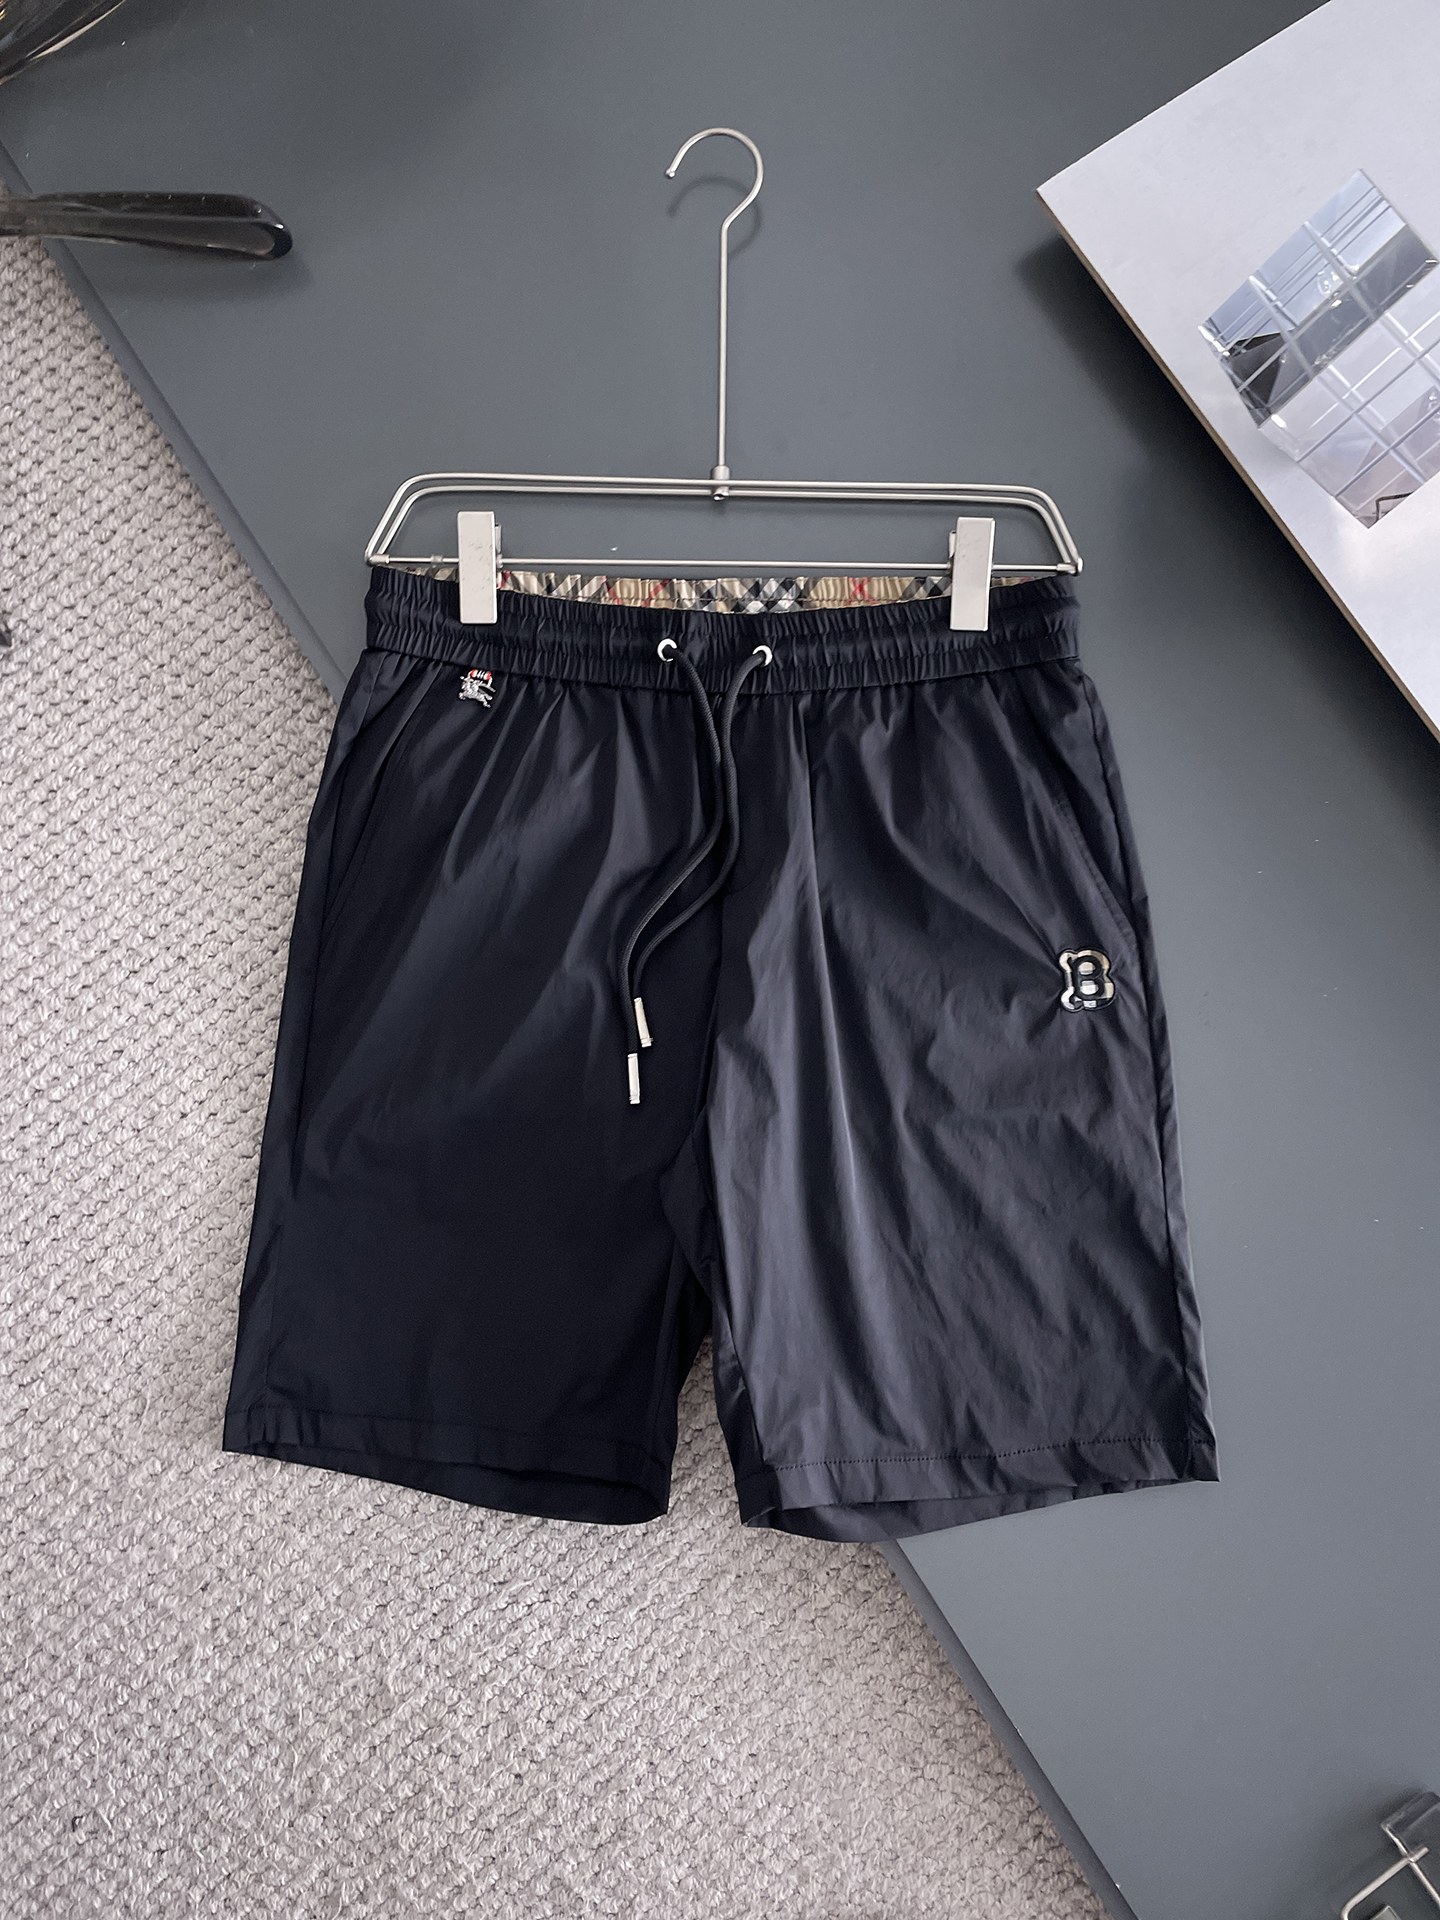 Burberry Clothing Shorts Men Summer Collection Casual